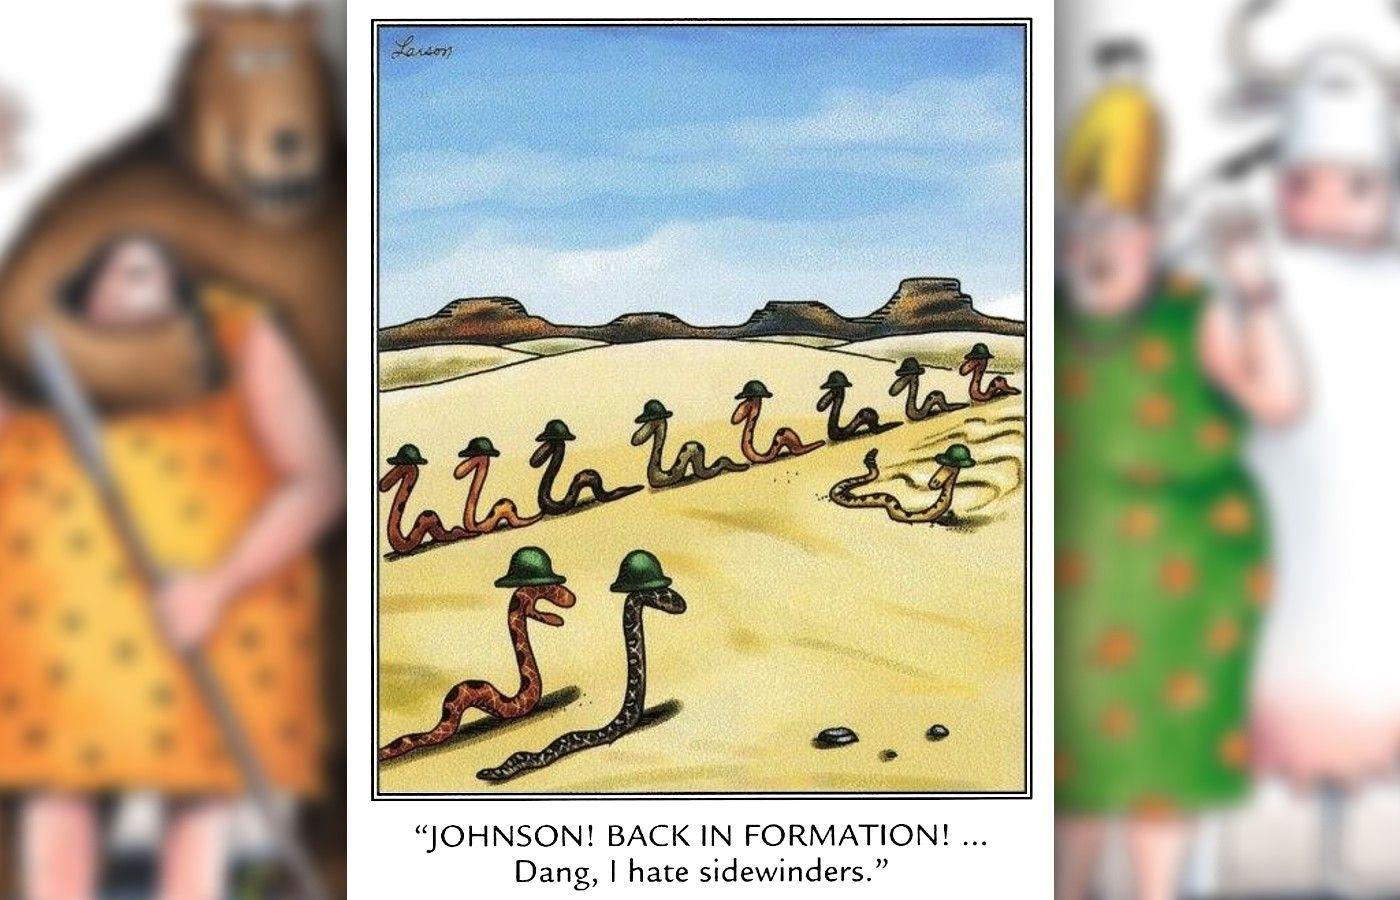 far side comic where snake soldiers hate the sidewinder because he can't stay in formation